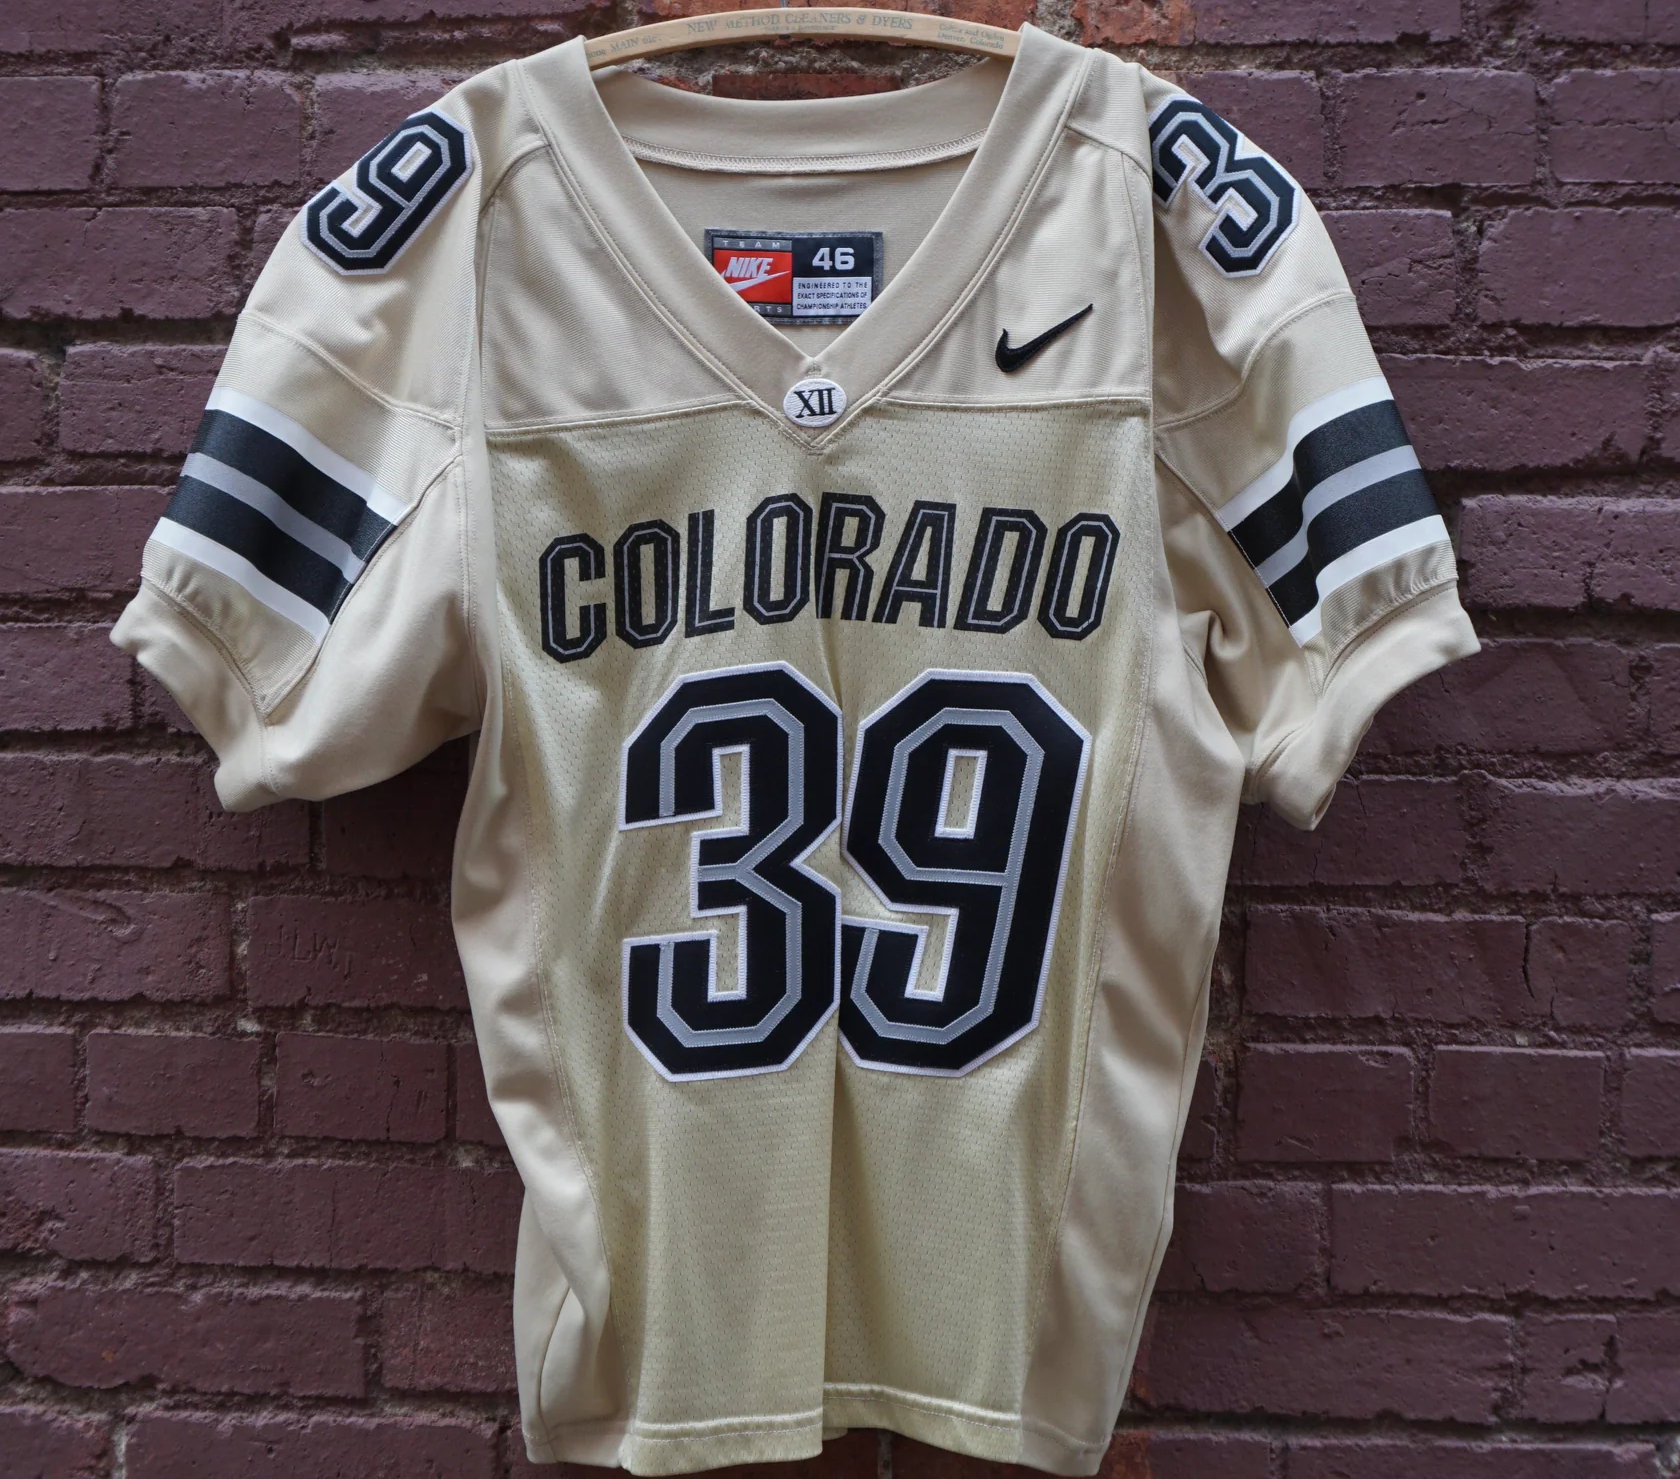 Uniform of the Day: Colorado goes Vegas gold for one night only